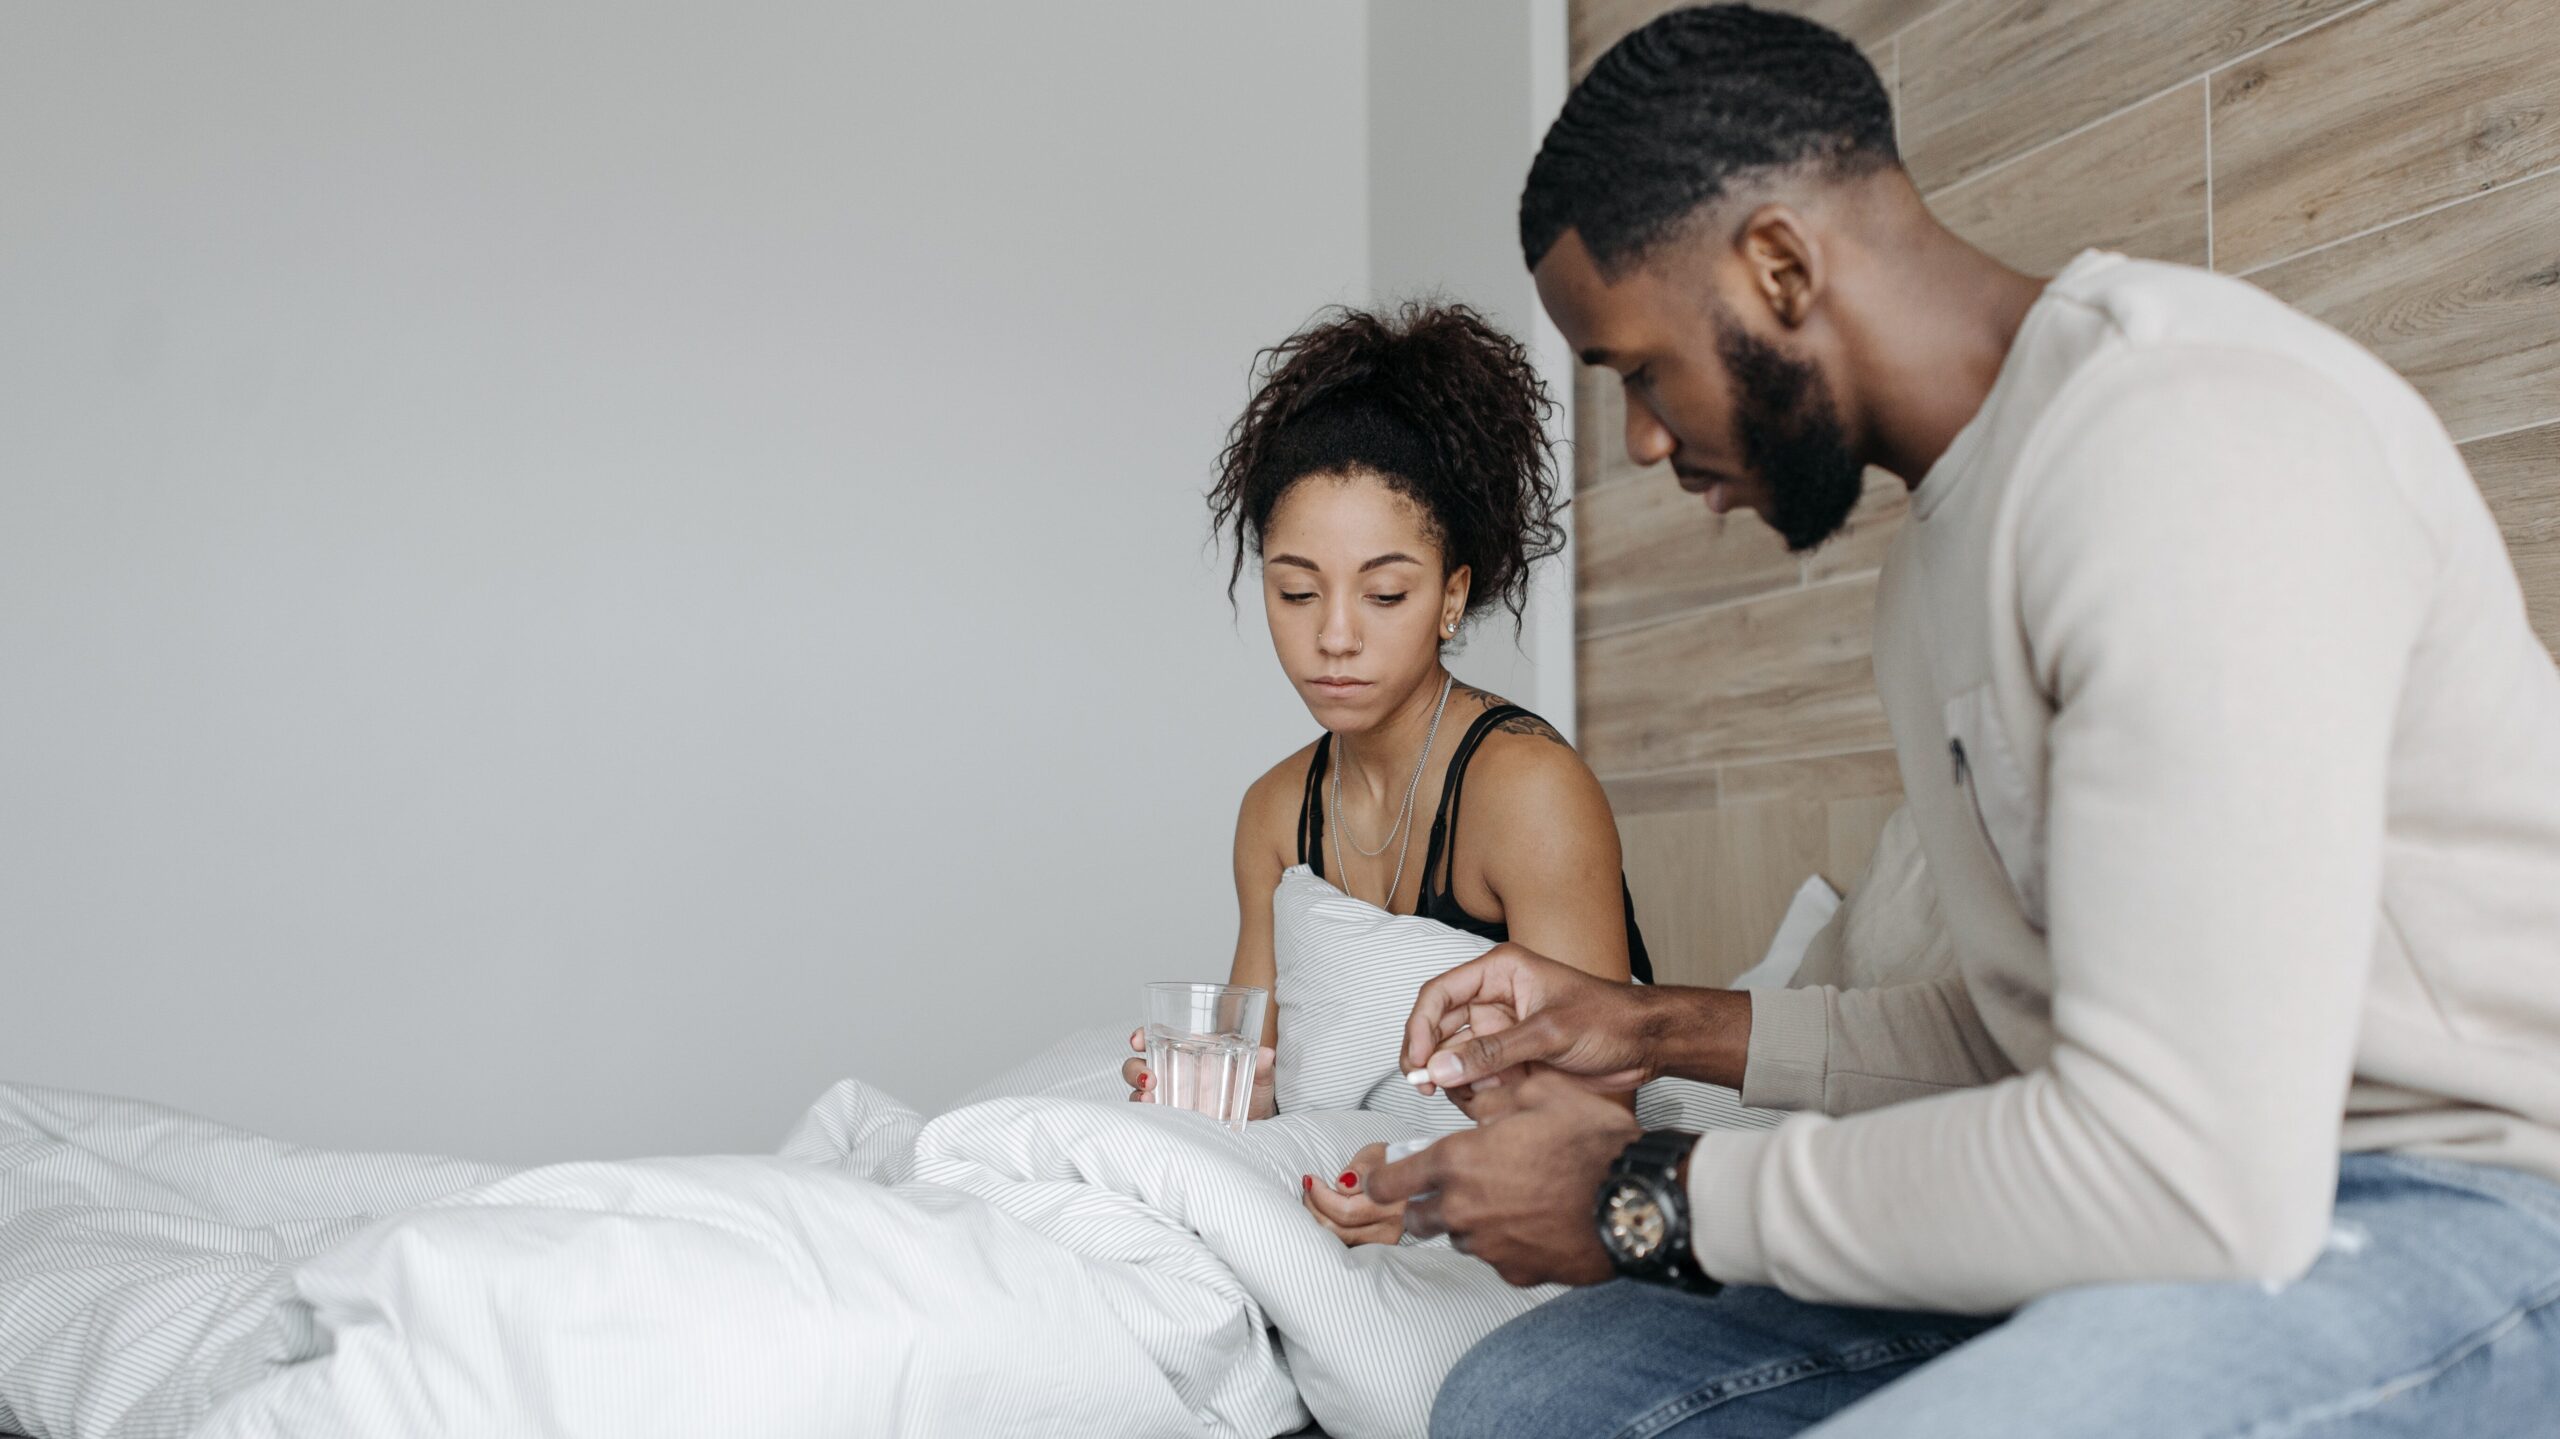 Man giving a woman pills while sitting in bed